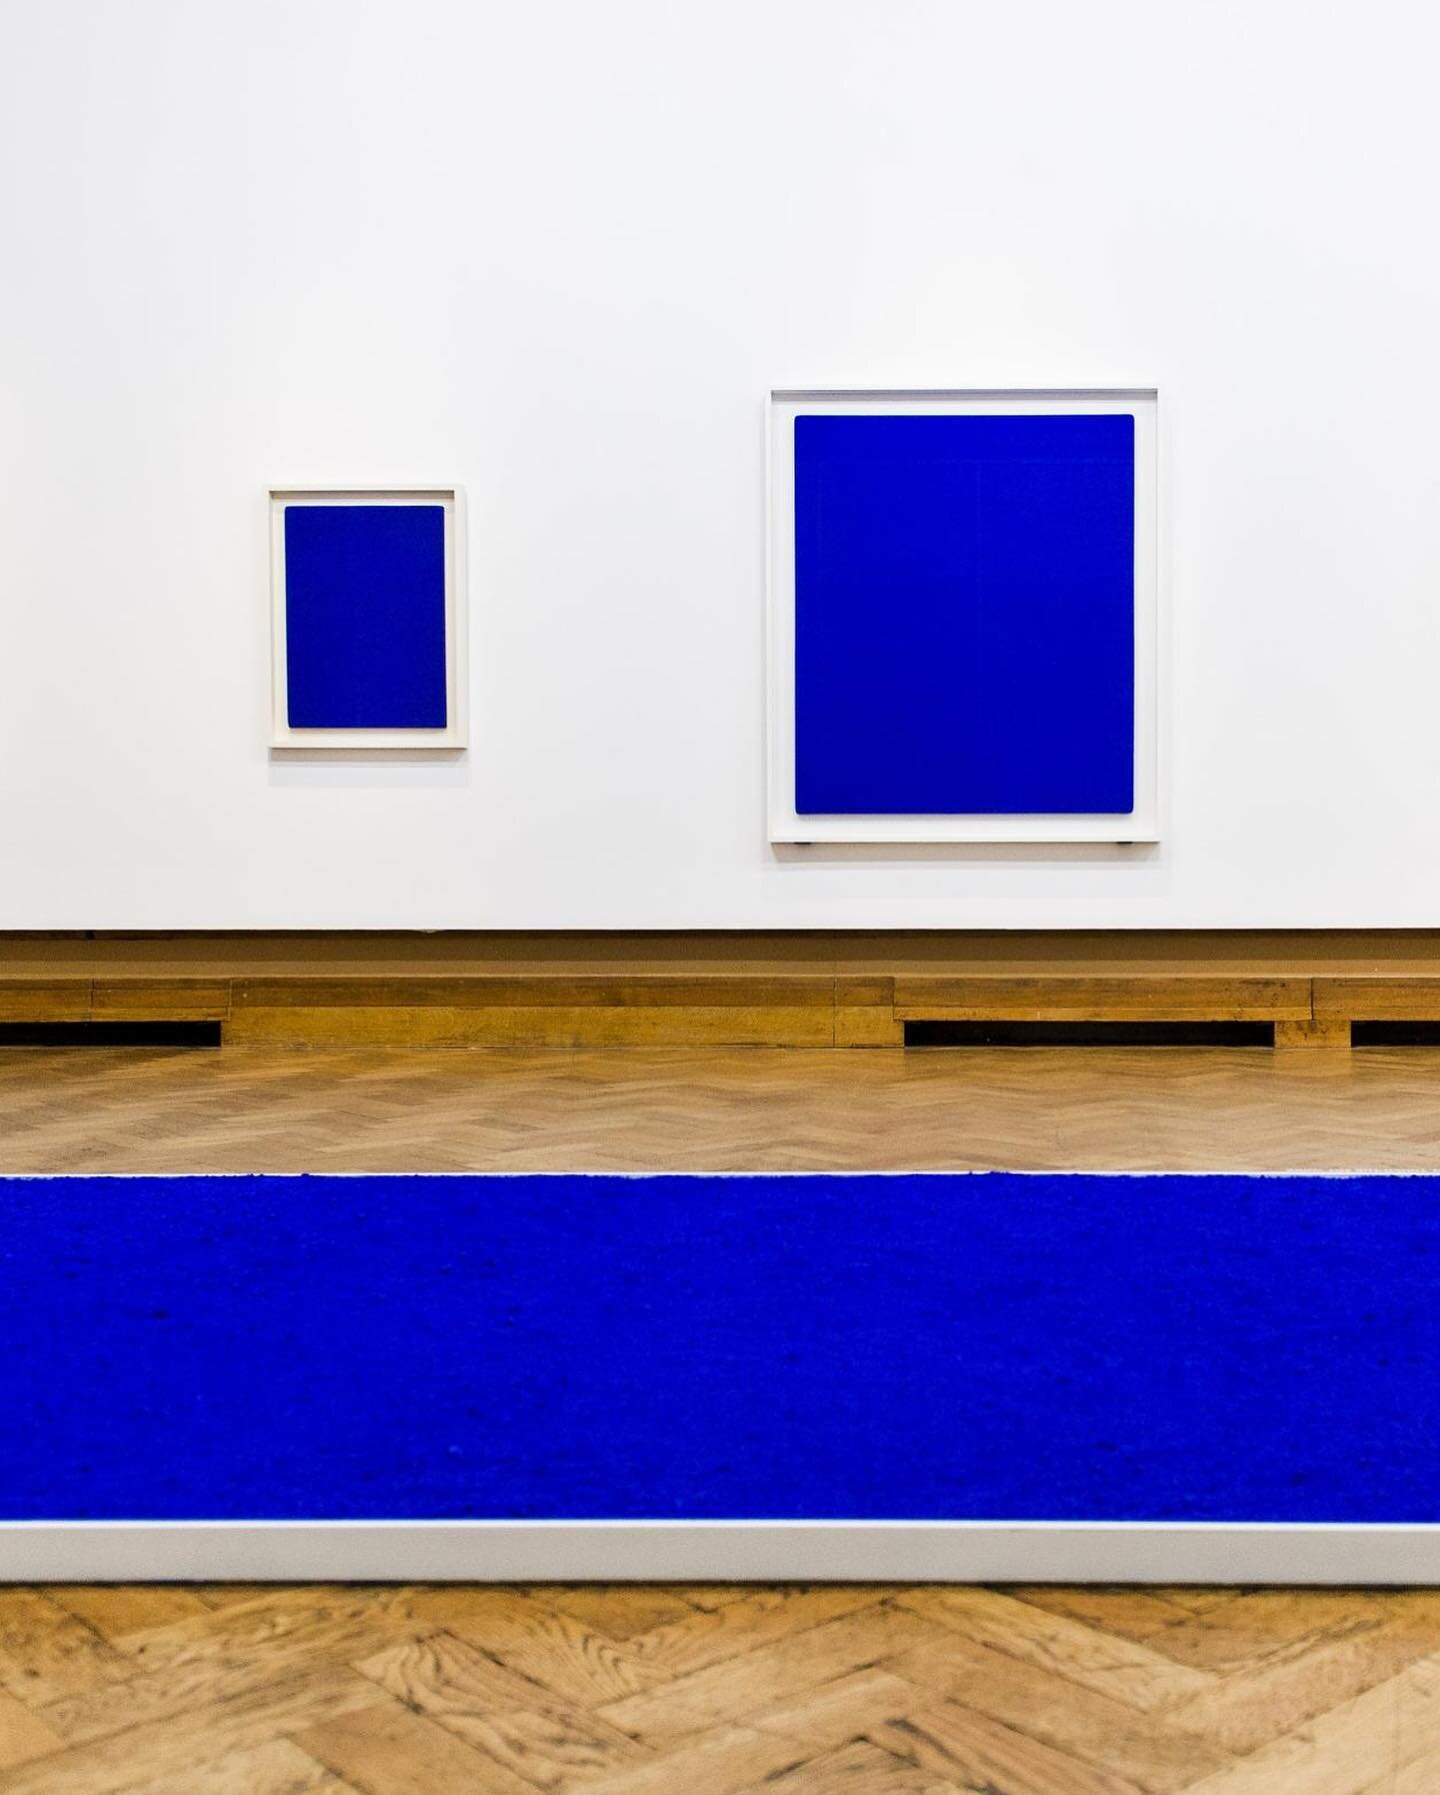 Prussian Blue / International Klein Blue/ Ultramarine Blue: whatever you call it, it&rsquo;s the pigment made of ground Lapis Lazuli stone that has shaped art history from all corners of the world as a signifier of wealth and royalty.